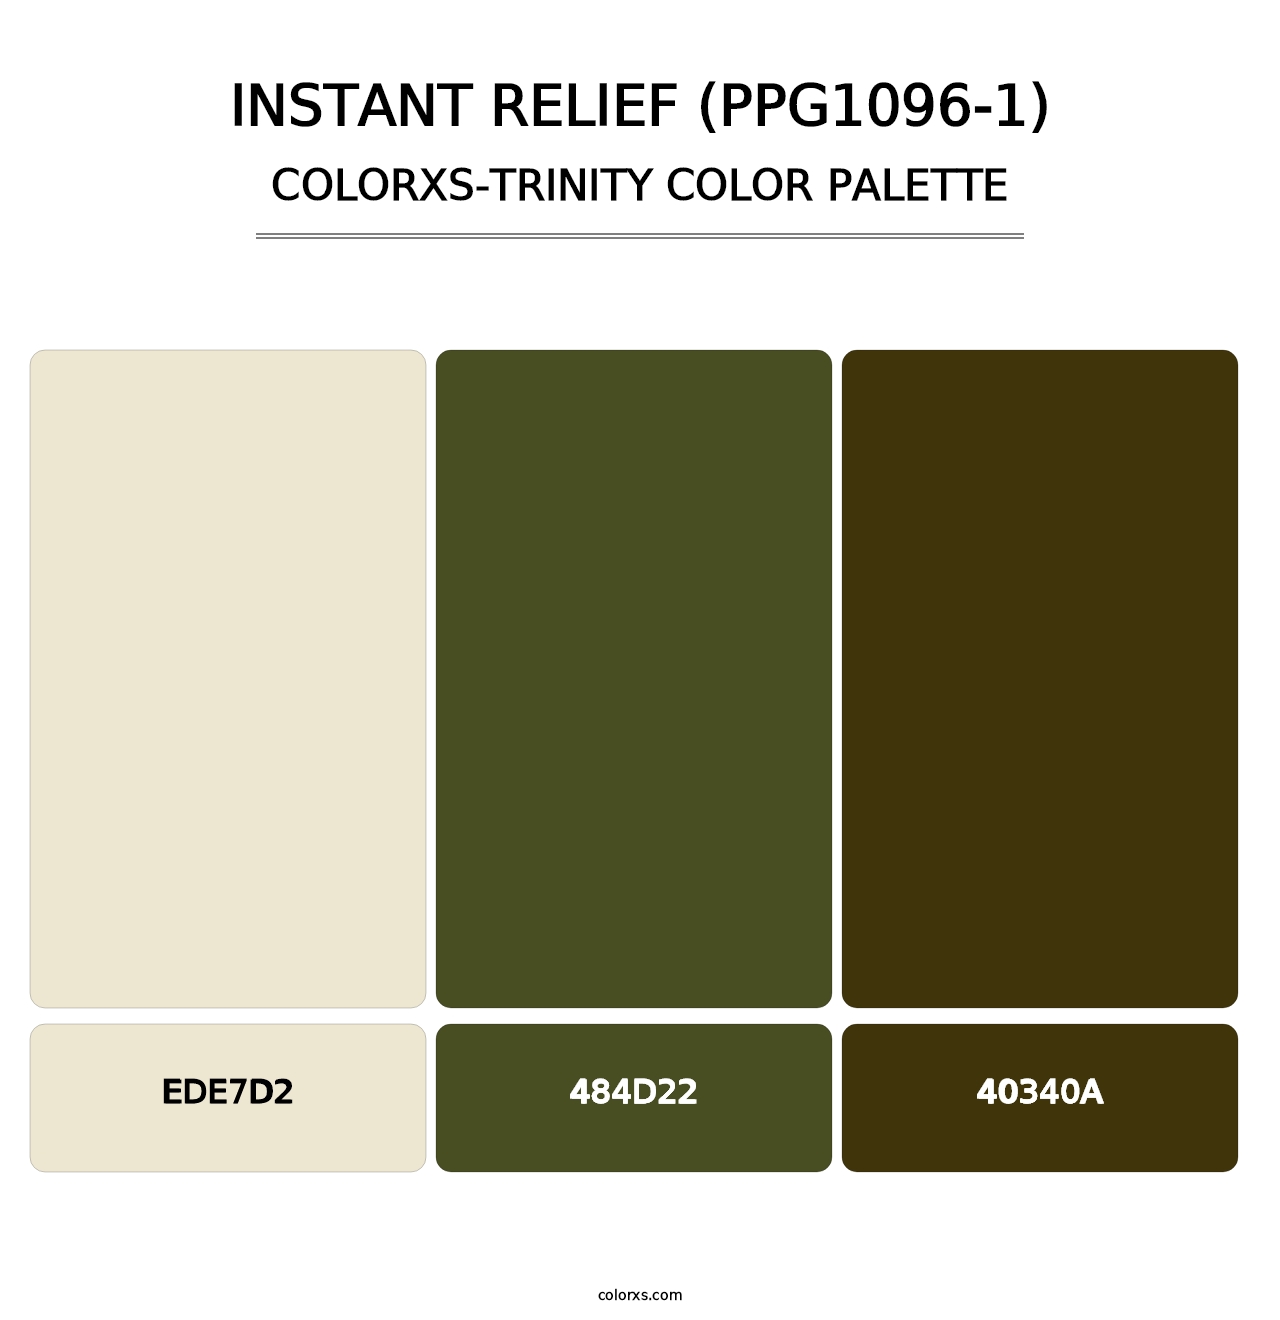 Instant Relief (PPG1096-1) - Colorxs Trinity Palette